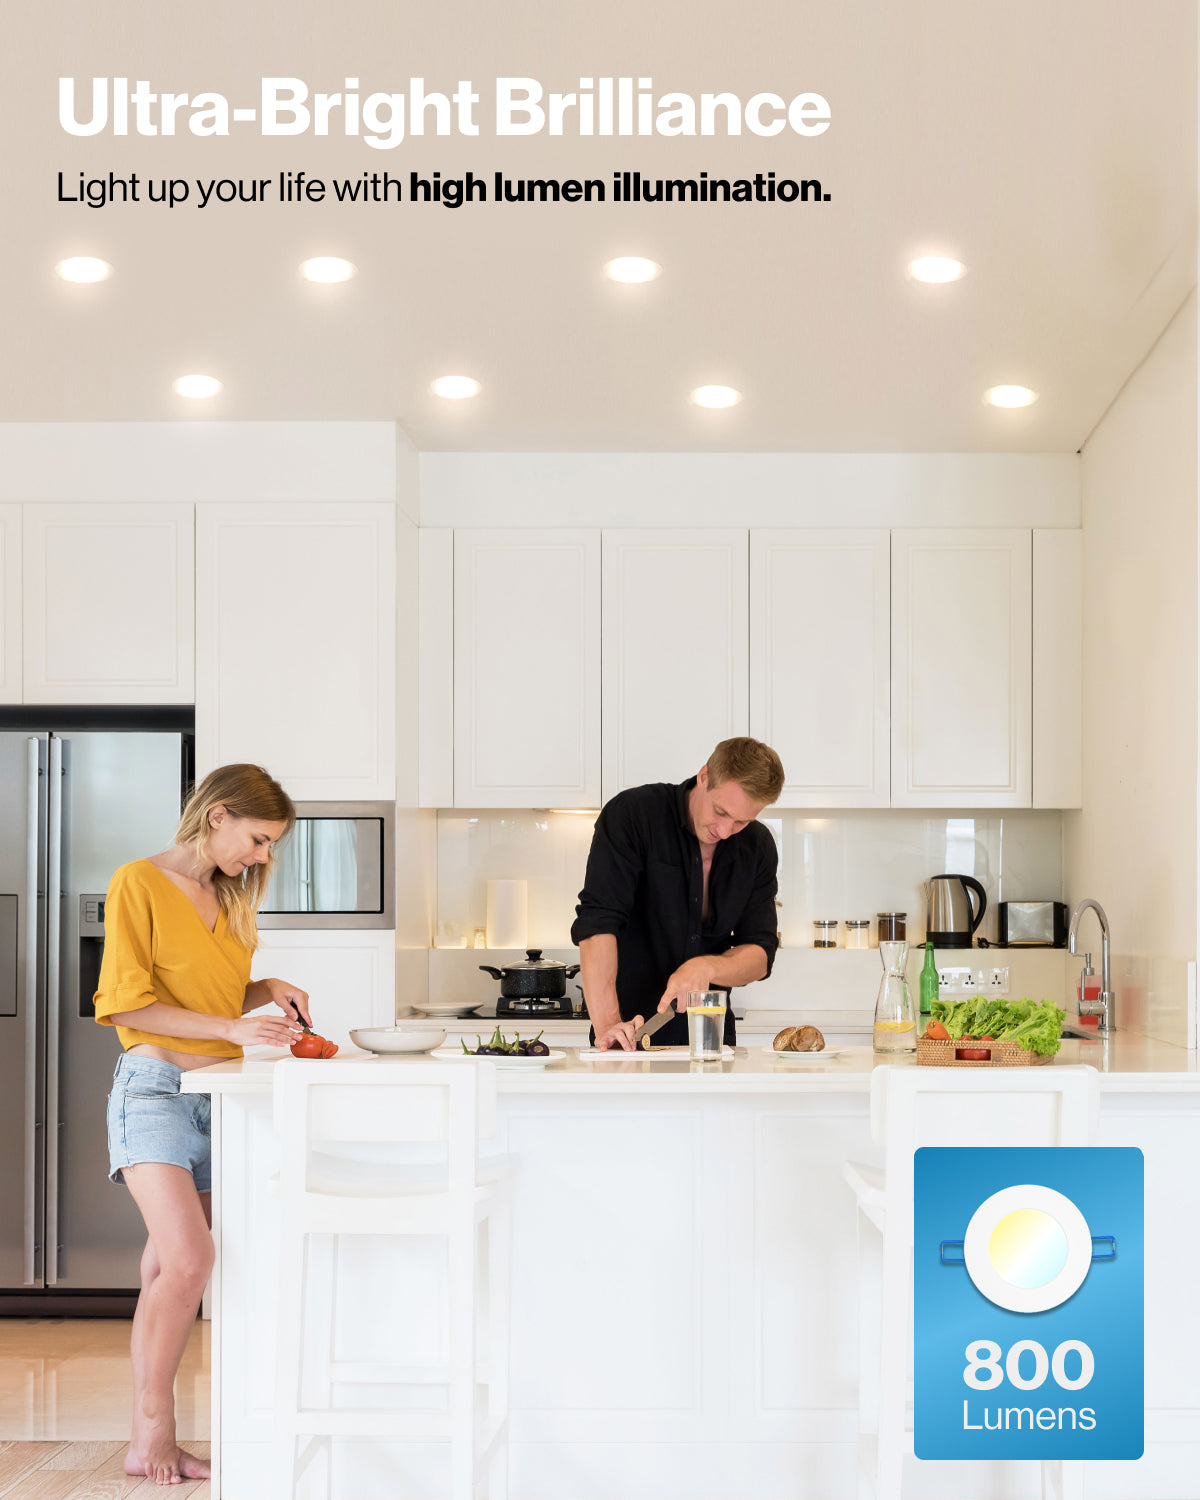 Brighten up your indoor spaces with vibrant lighting, crisp radiance, and an illuminated experience.